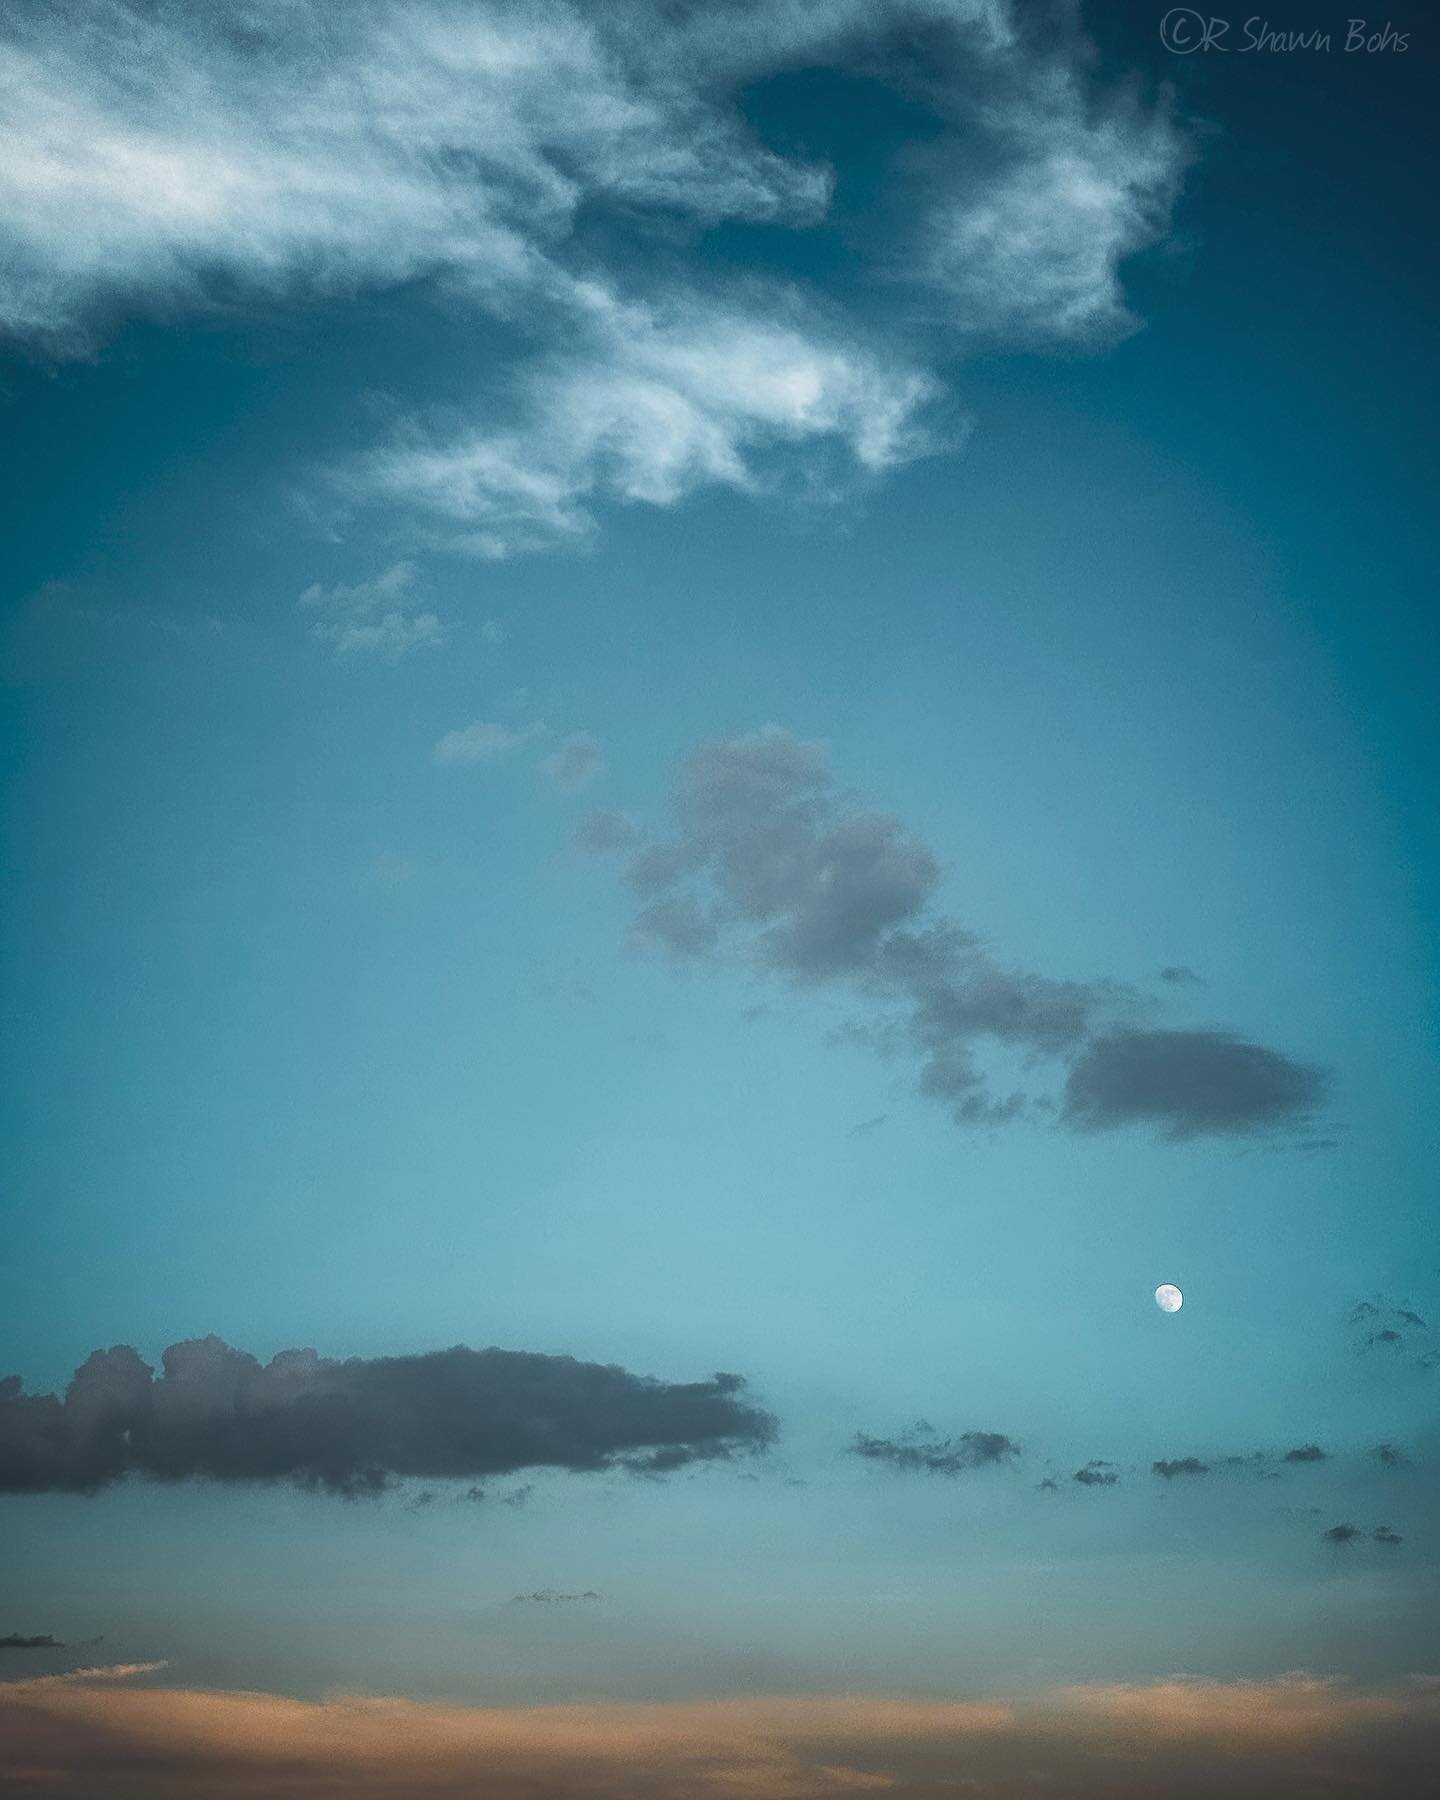 .
.
A soft sky without relief.
A lazy moon sound asleep.
Summer laughed under her breath,
looking down on the way July gets.
&ldquo;I&rsquo;m ready to see what&rsquo;s next.&rdquo;
.
.
.
#phoetry #photography #poetry